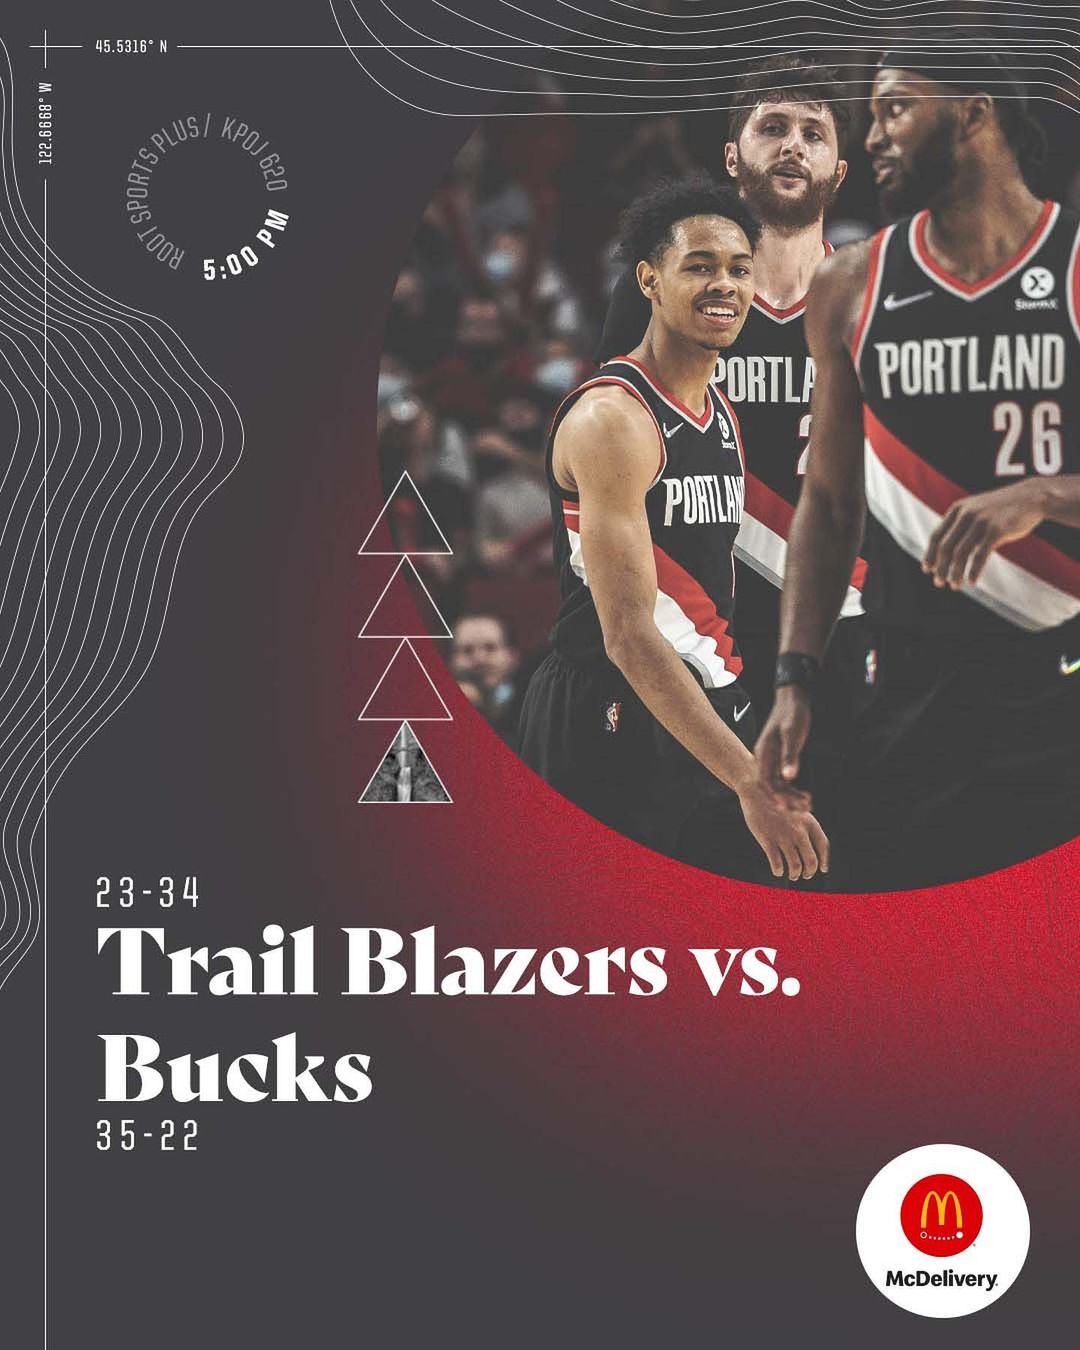 Friends, it’s very chilly out  #RipCity  vs @bucks 
 @fiservforum 
 5:00PM
 RO...